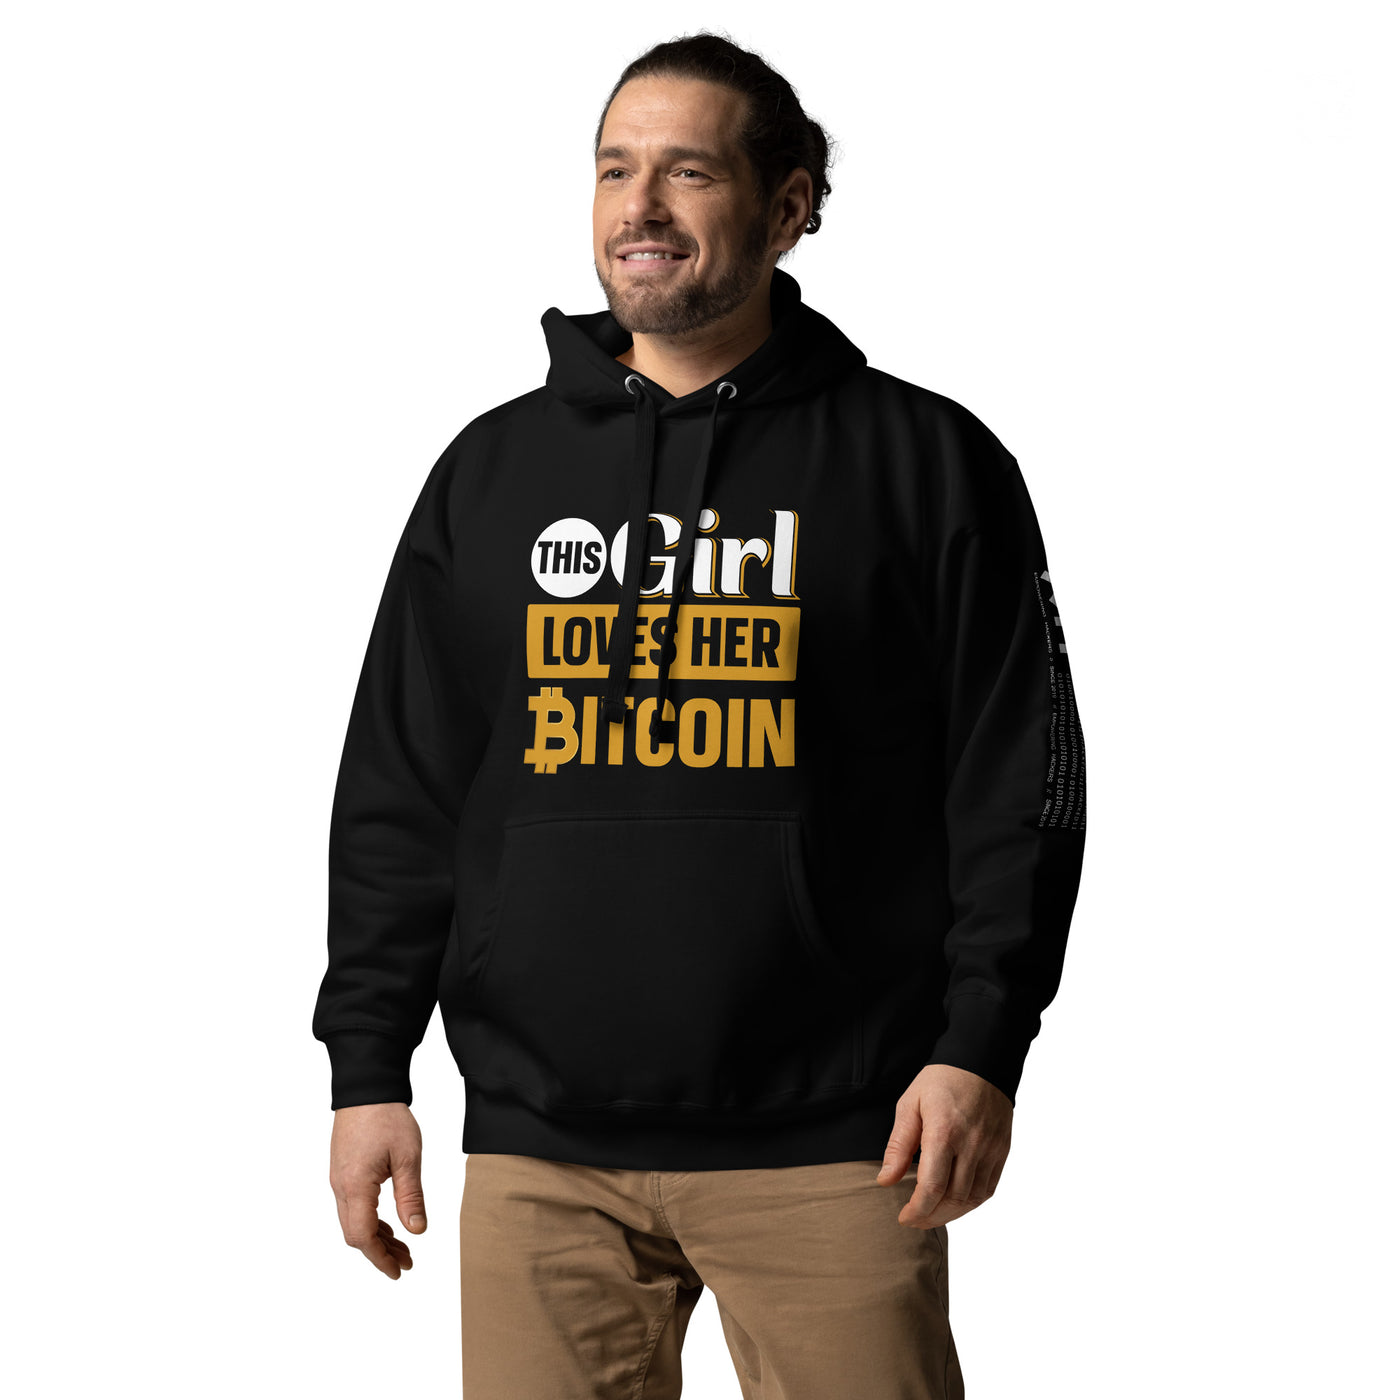 This Girl love her Bitcoin Unisex Hoodie